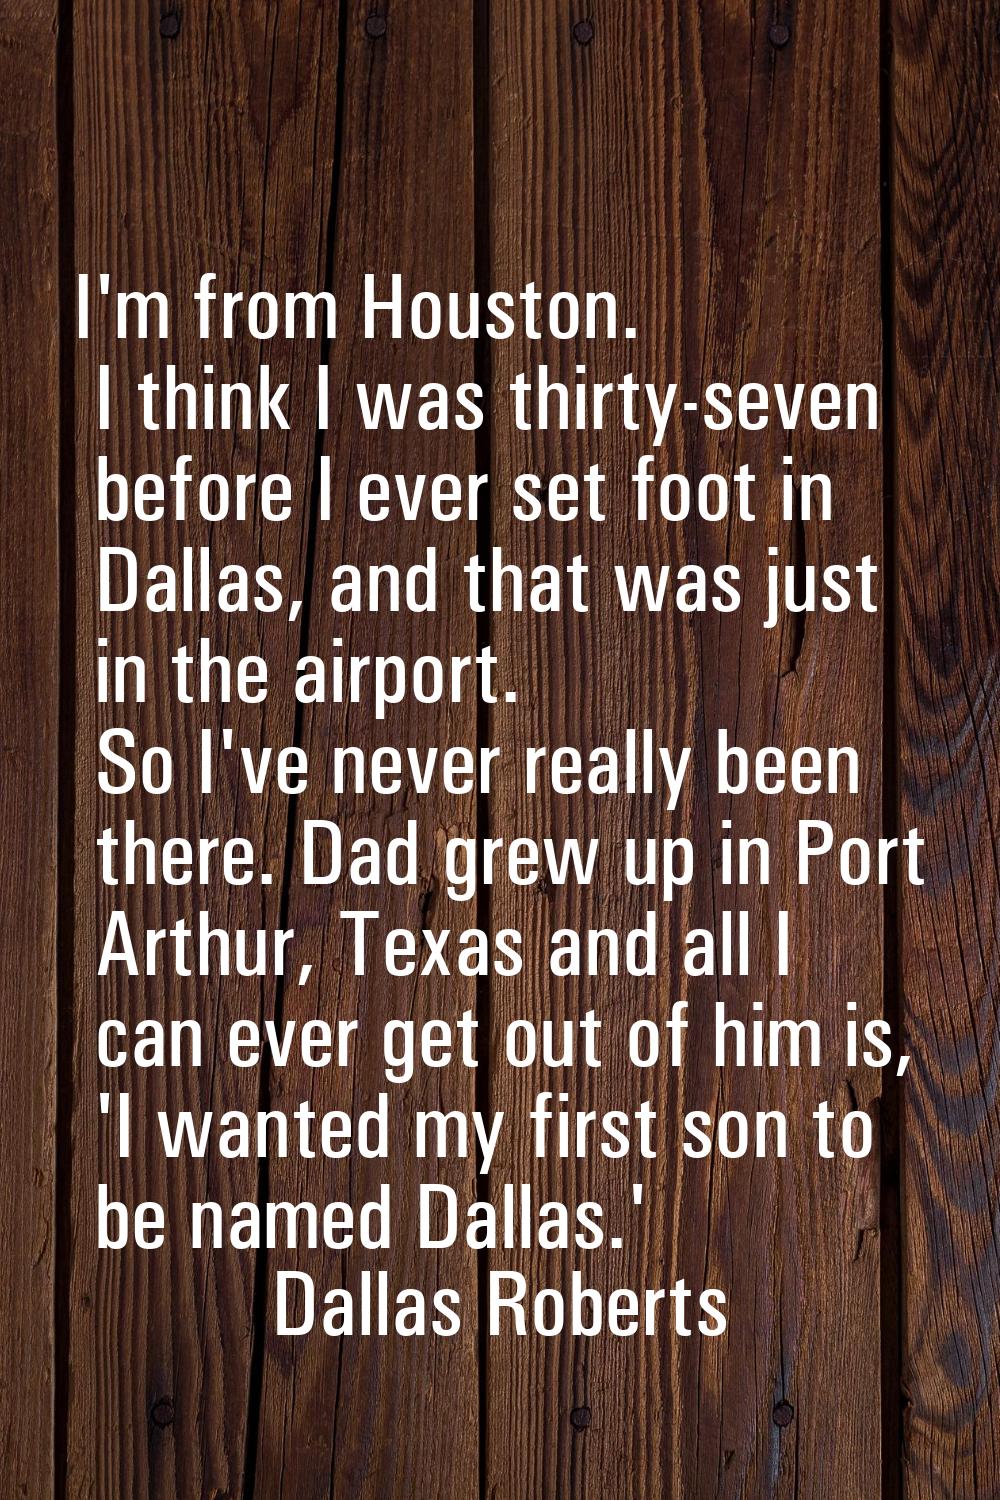 I'm from Houston. I think I was thirty-seven before I ever set foot in Dallas, and that was just in